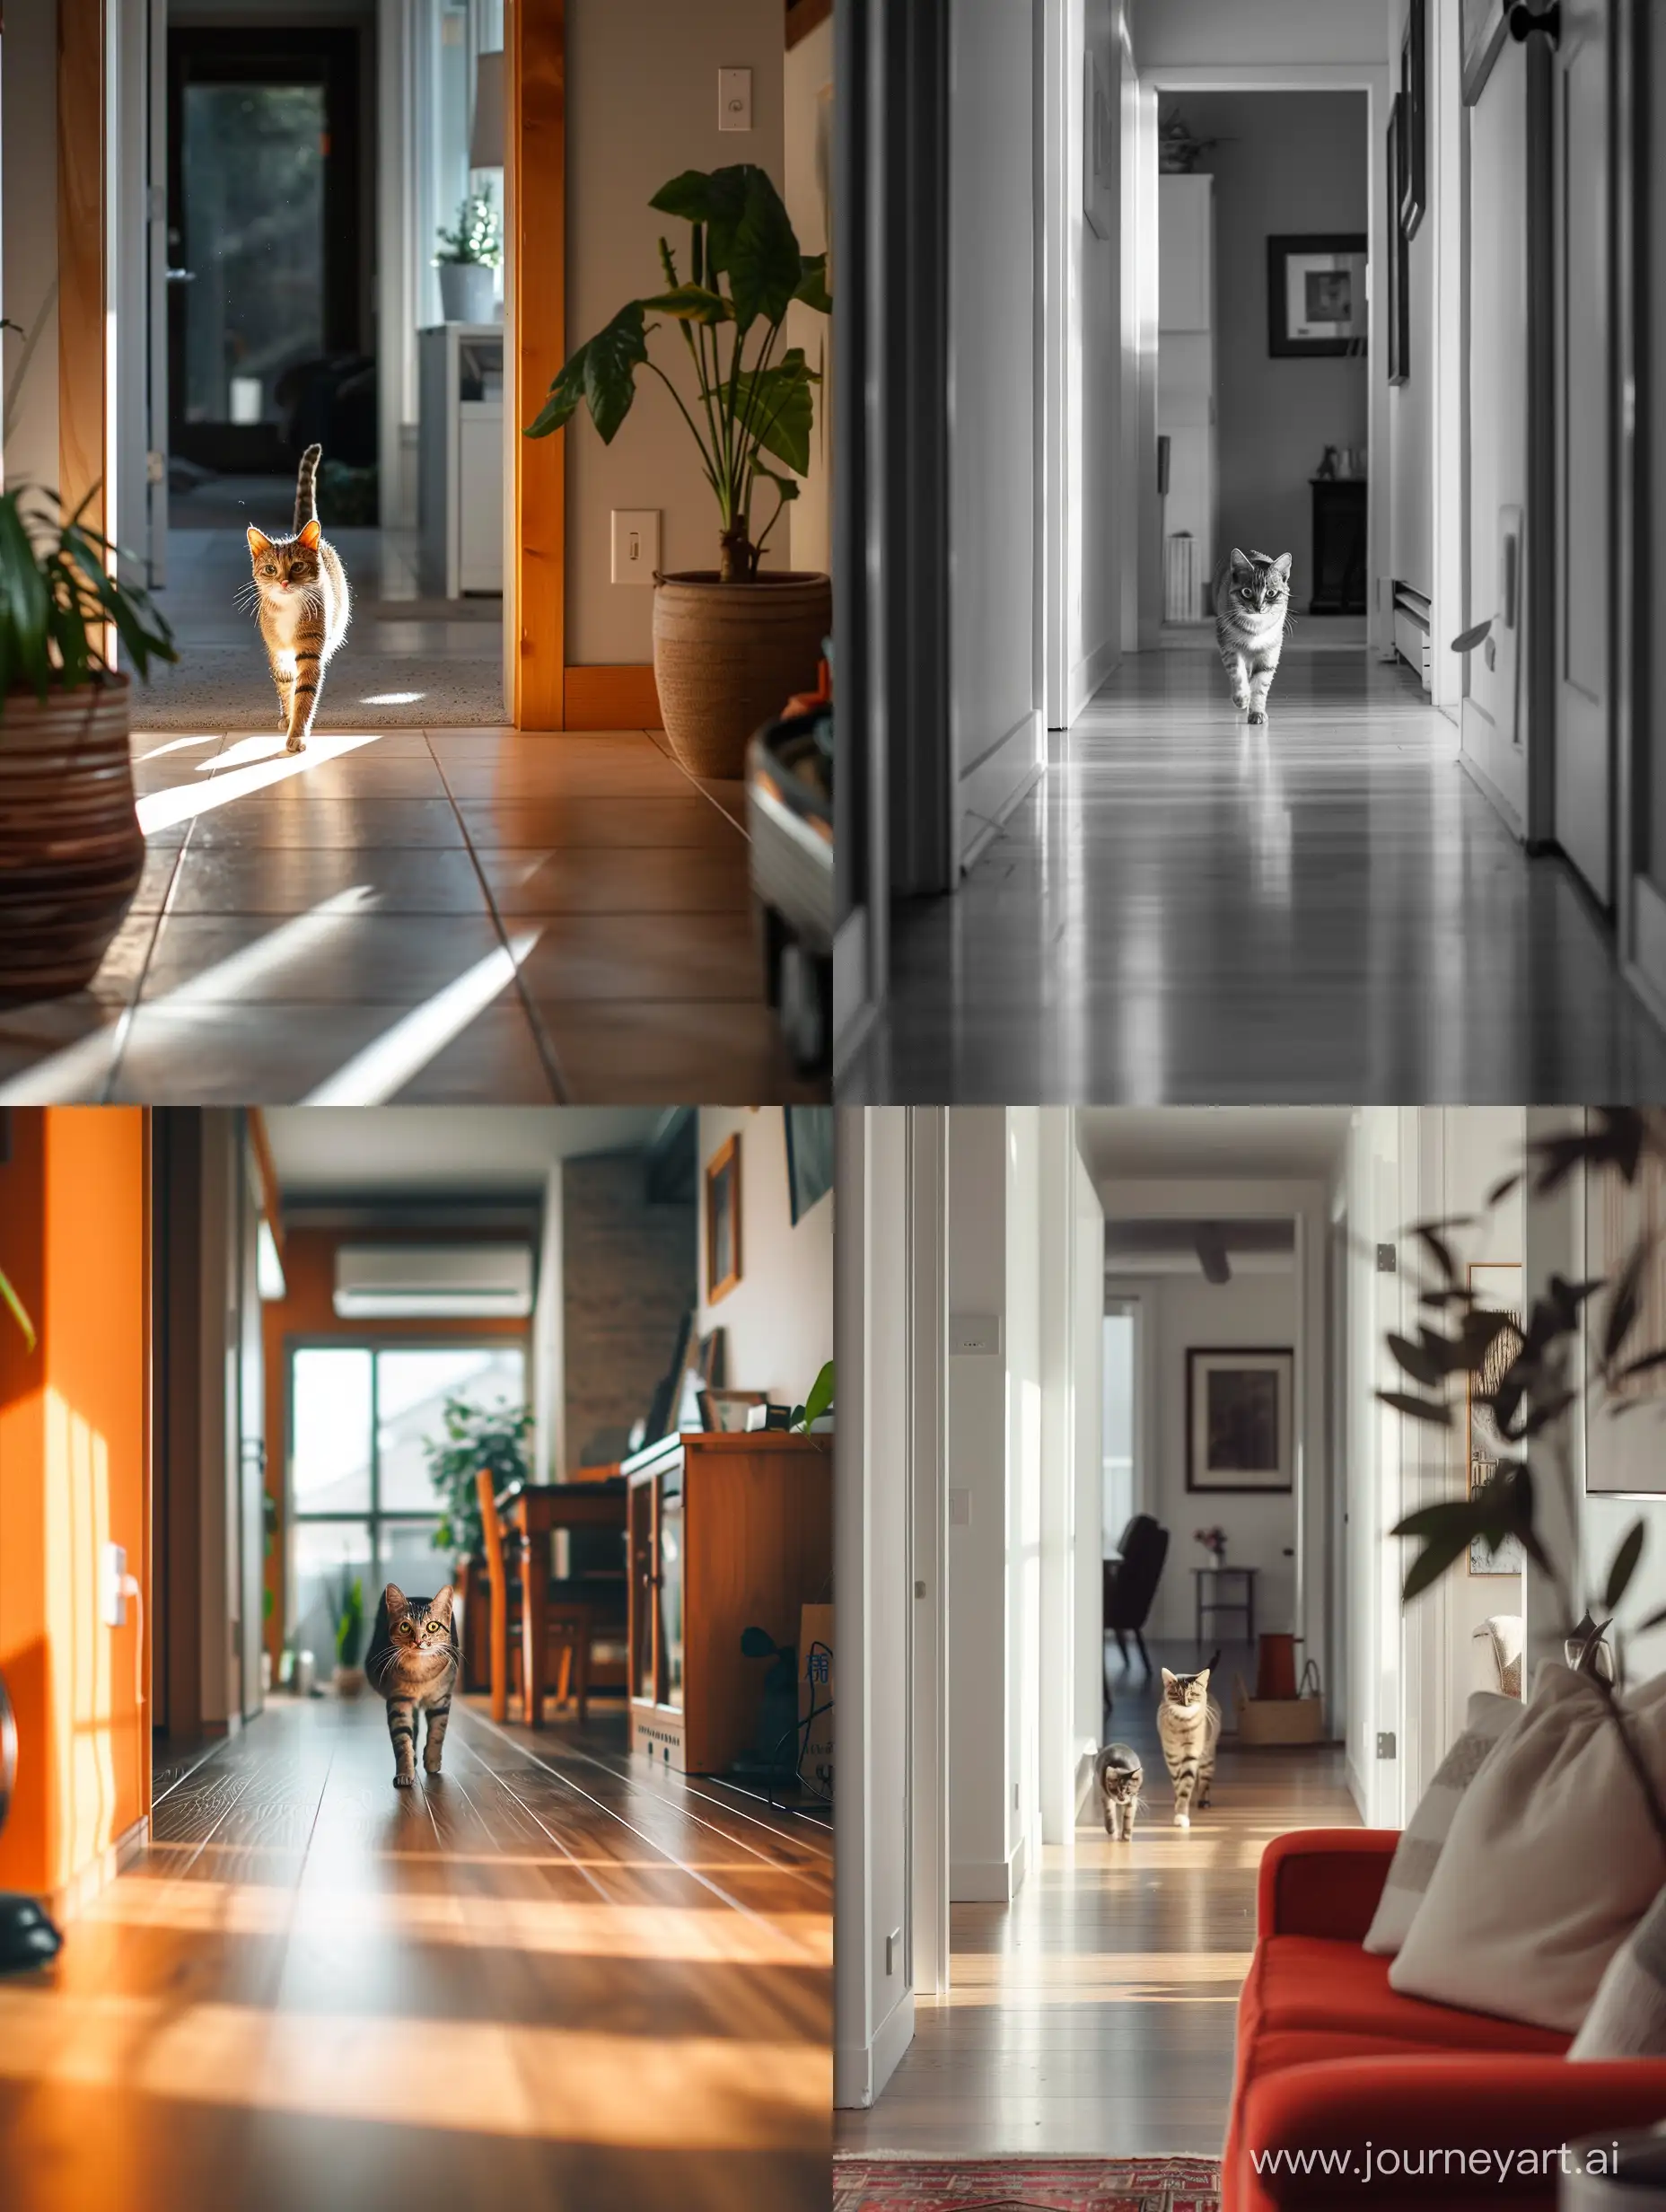 A cat walking towards the camera from afar in the corridor of the house. It comes from the point of the corridor farthest from the lens. The lens is close to the ground at the cat's height.